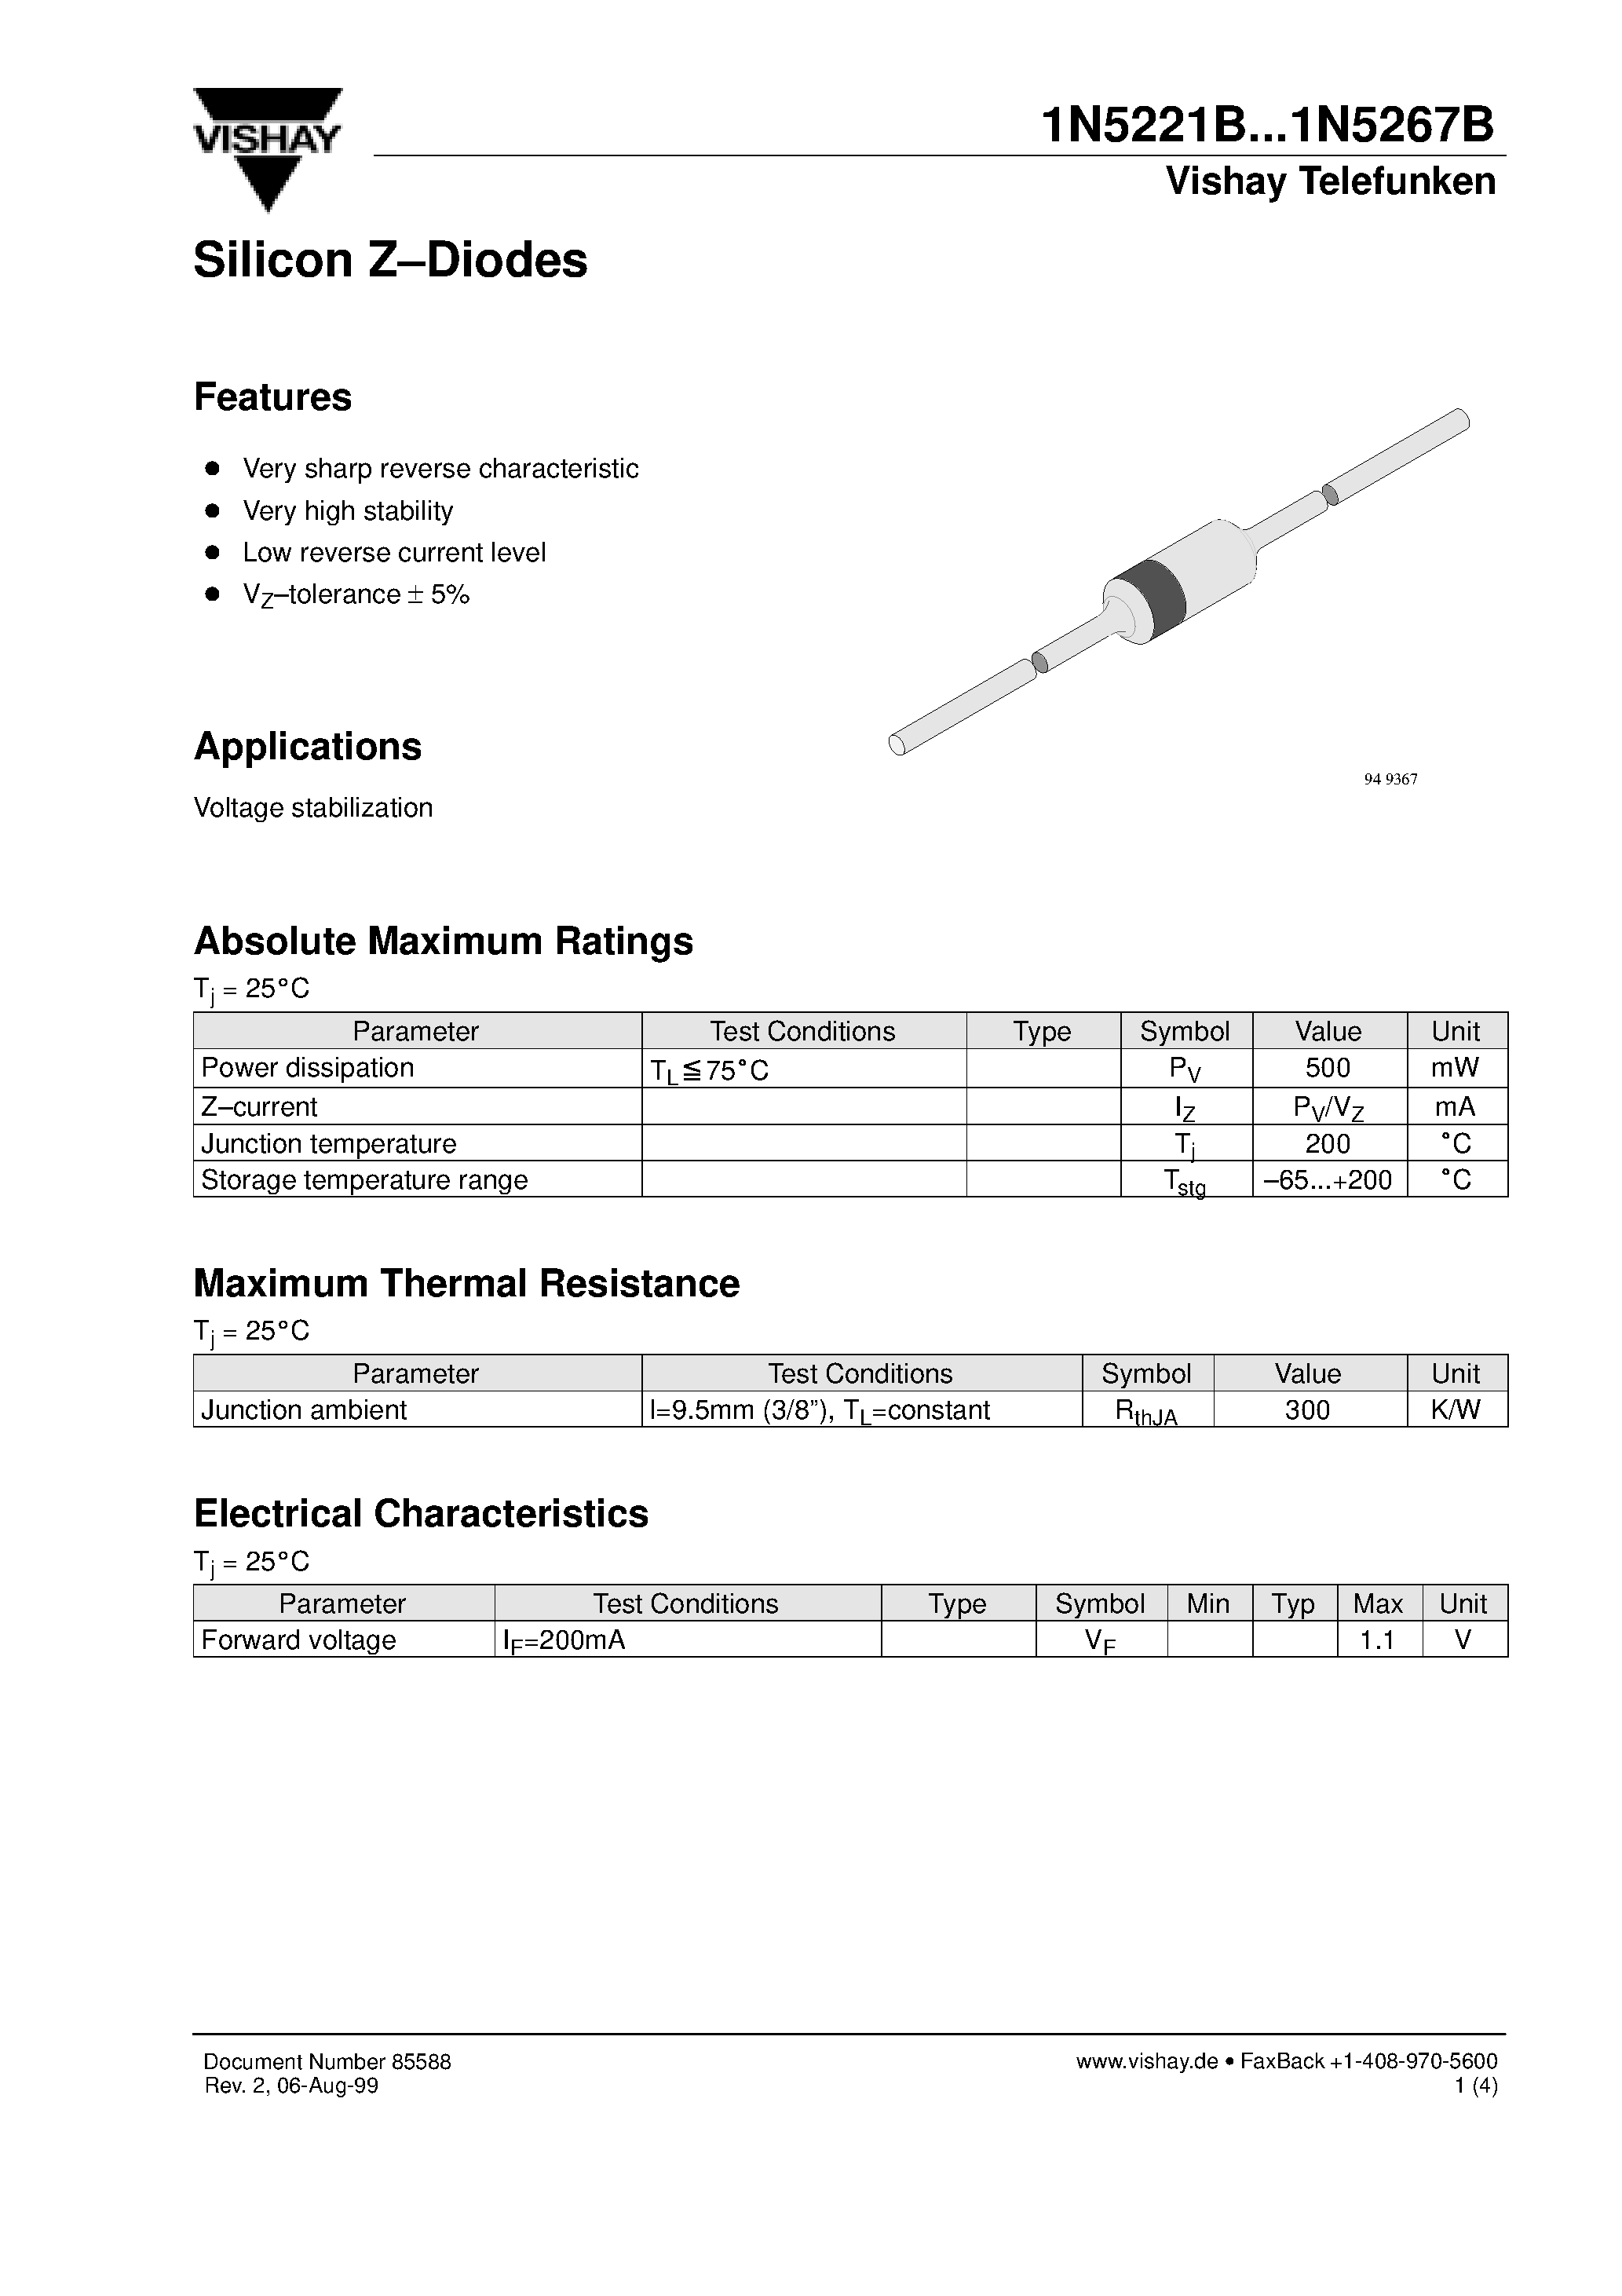 Datasheet 1N5232B - Silicon Z-Diodes page 1